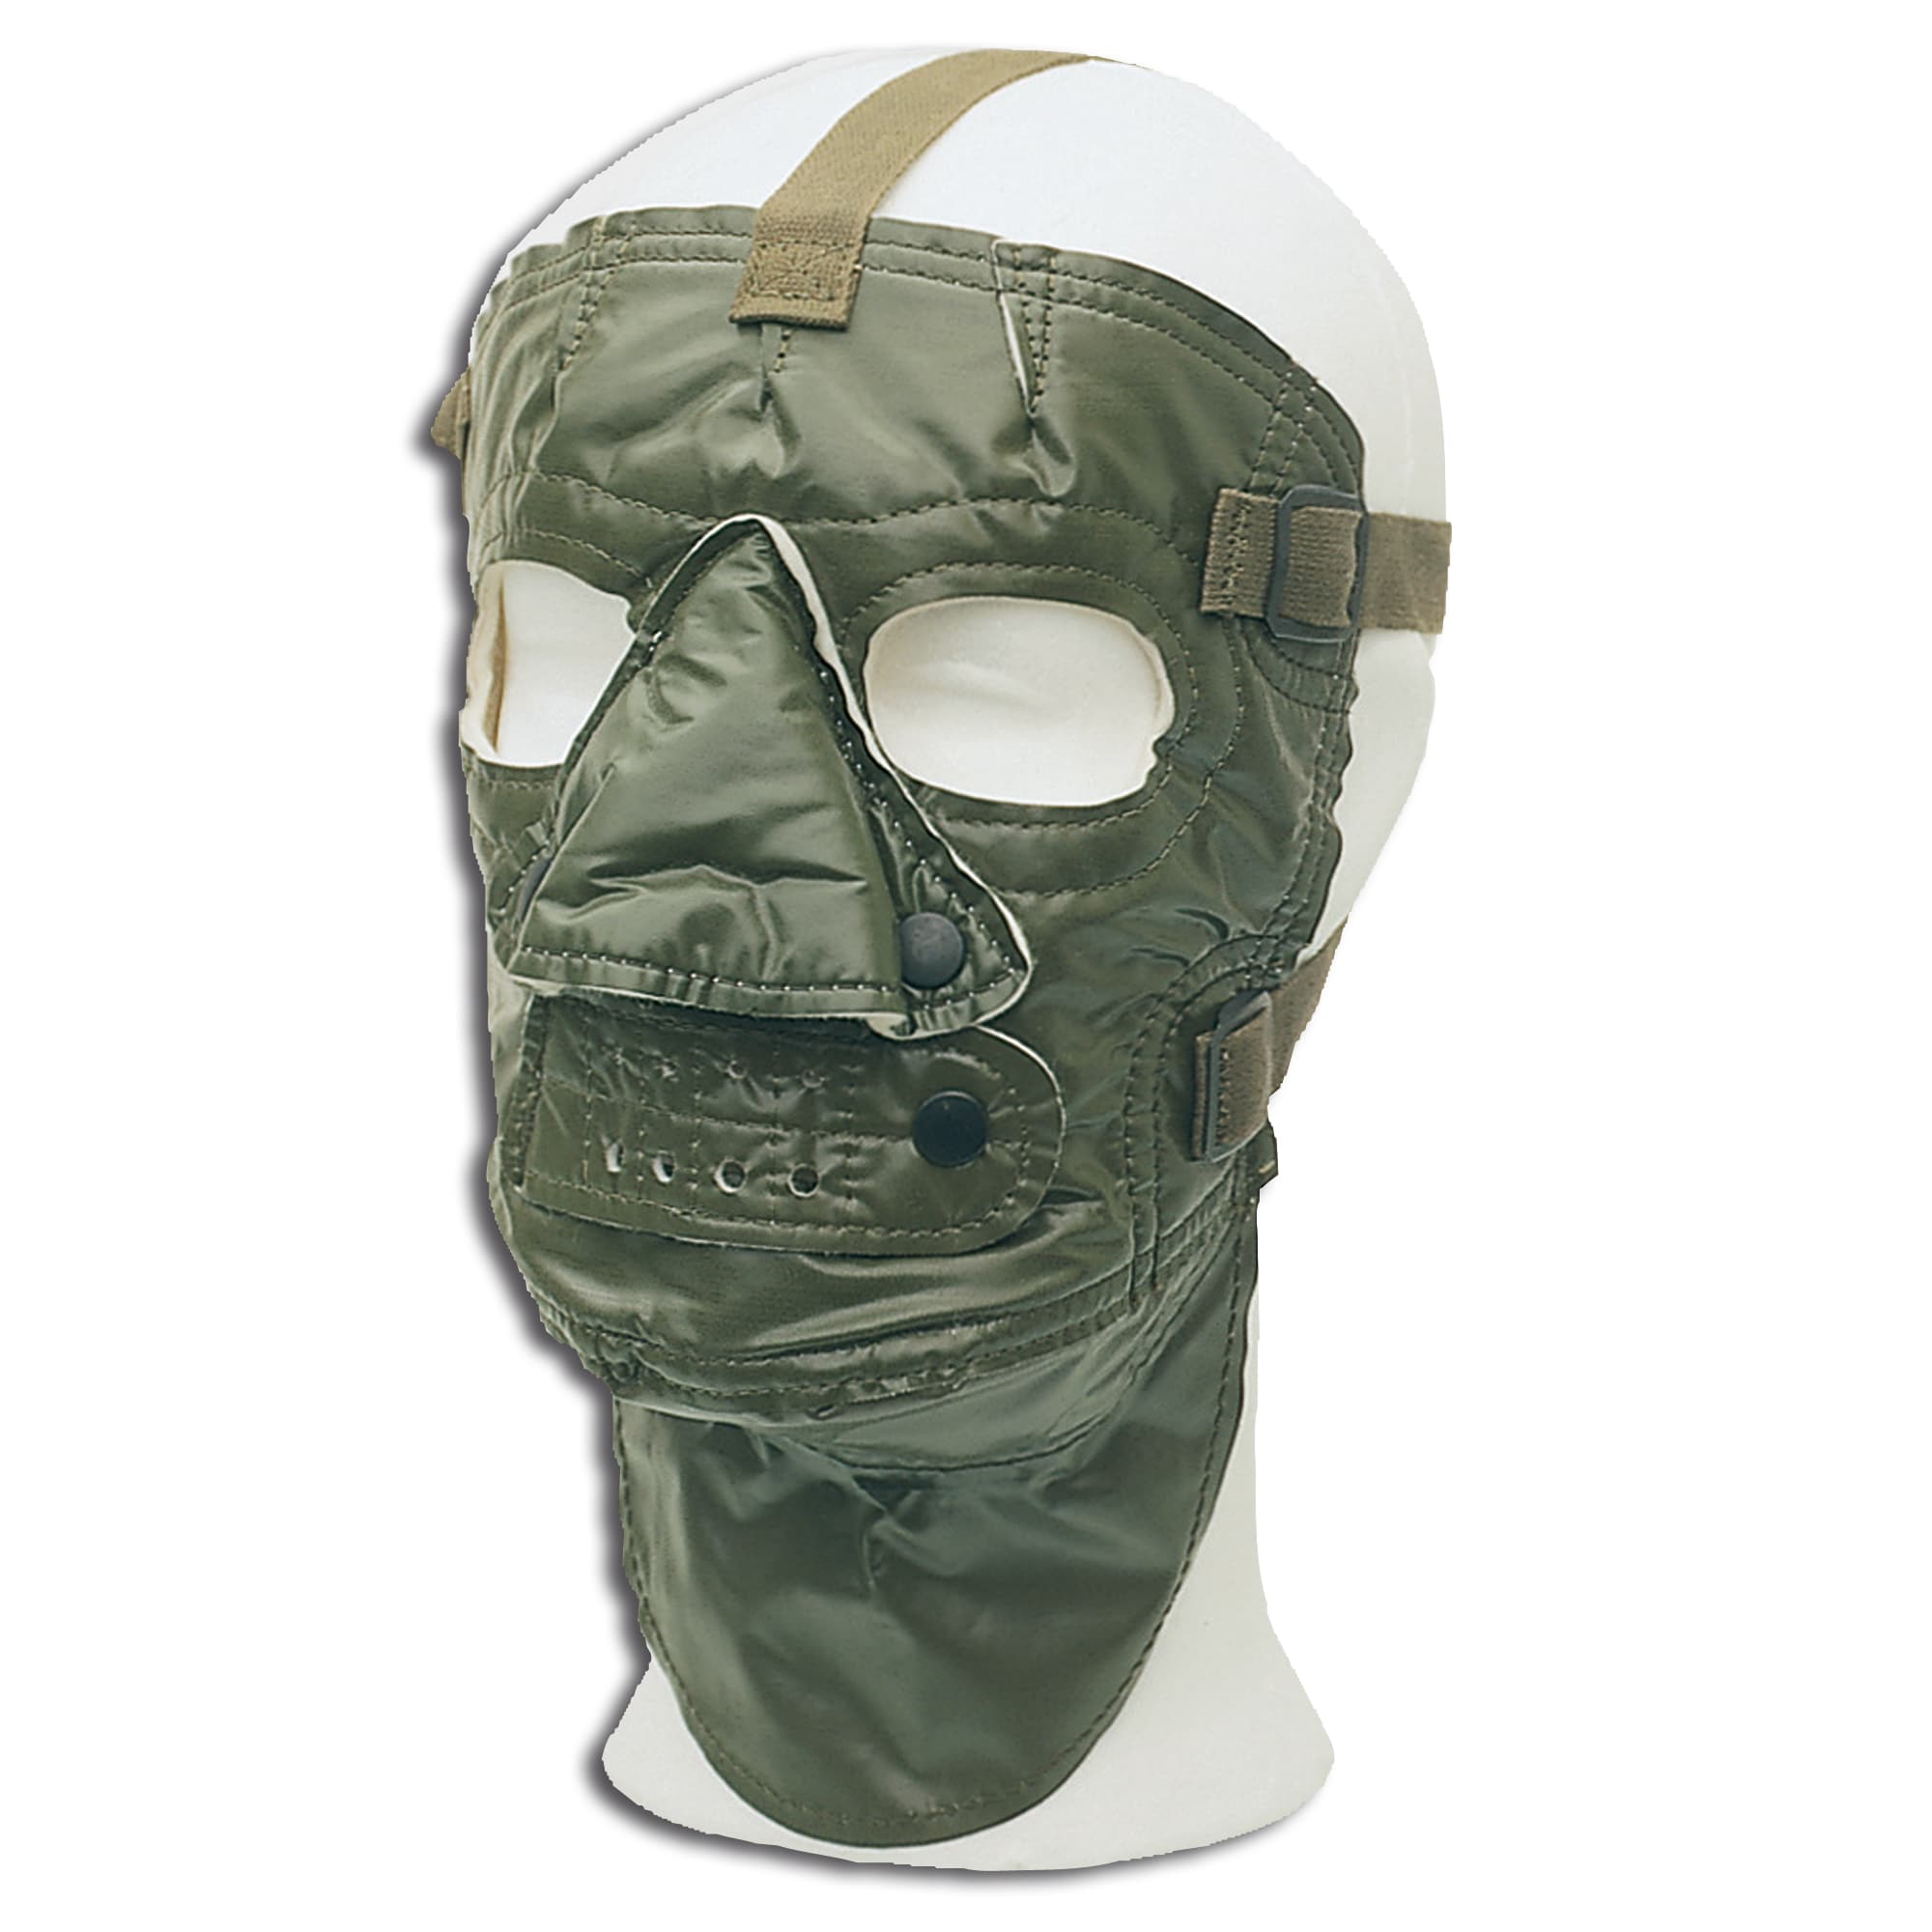 US Army Extreme Cold Weather Mask: Ultimate Protection in Harsh Winter ...